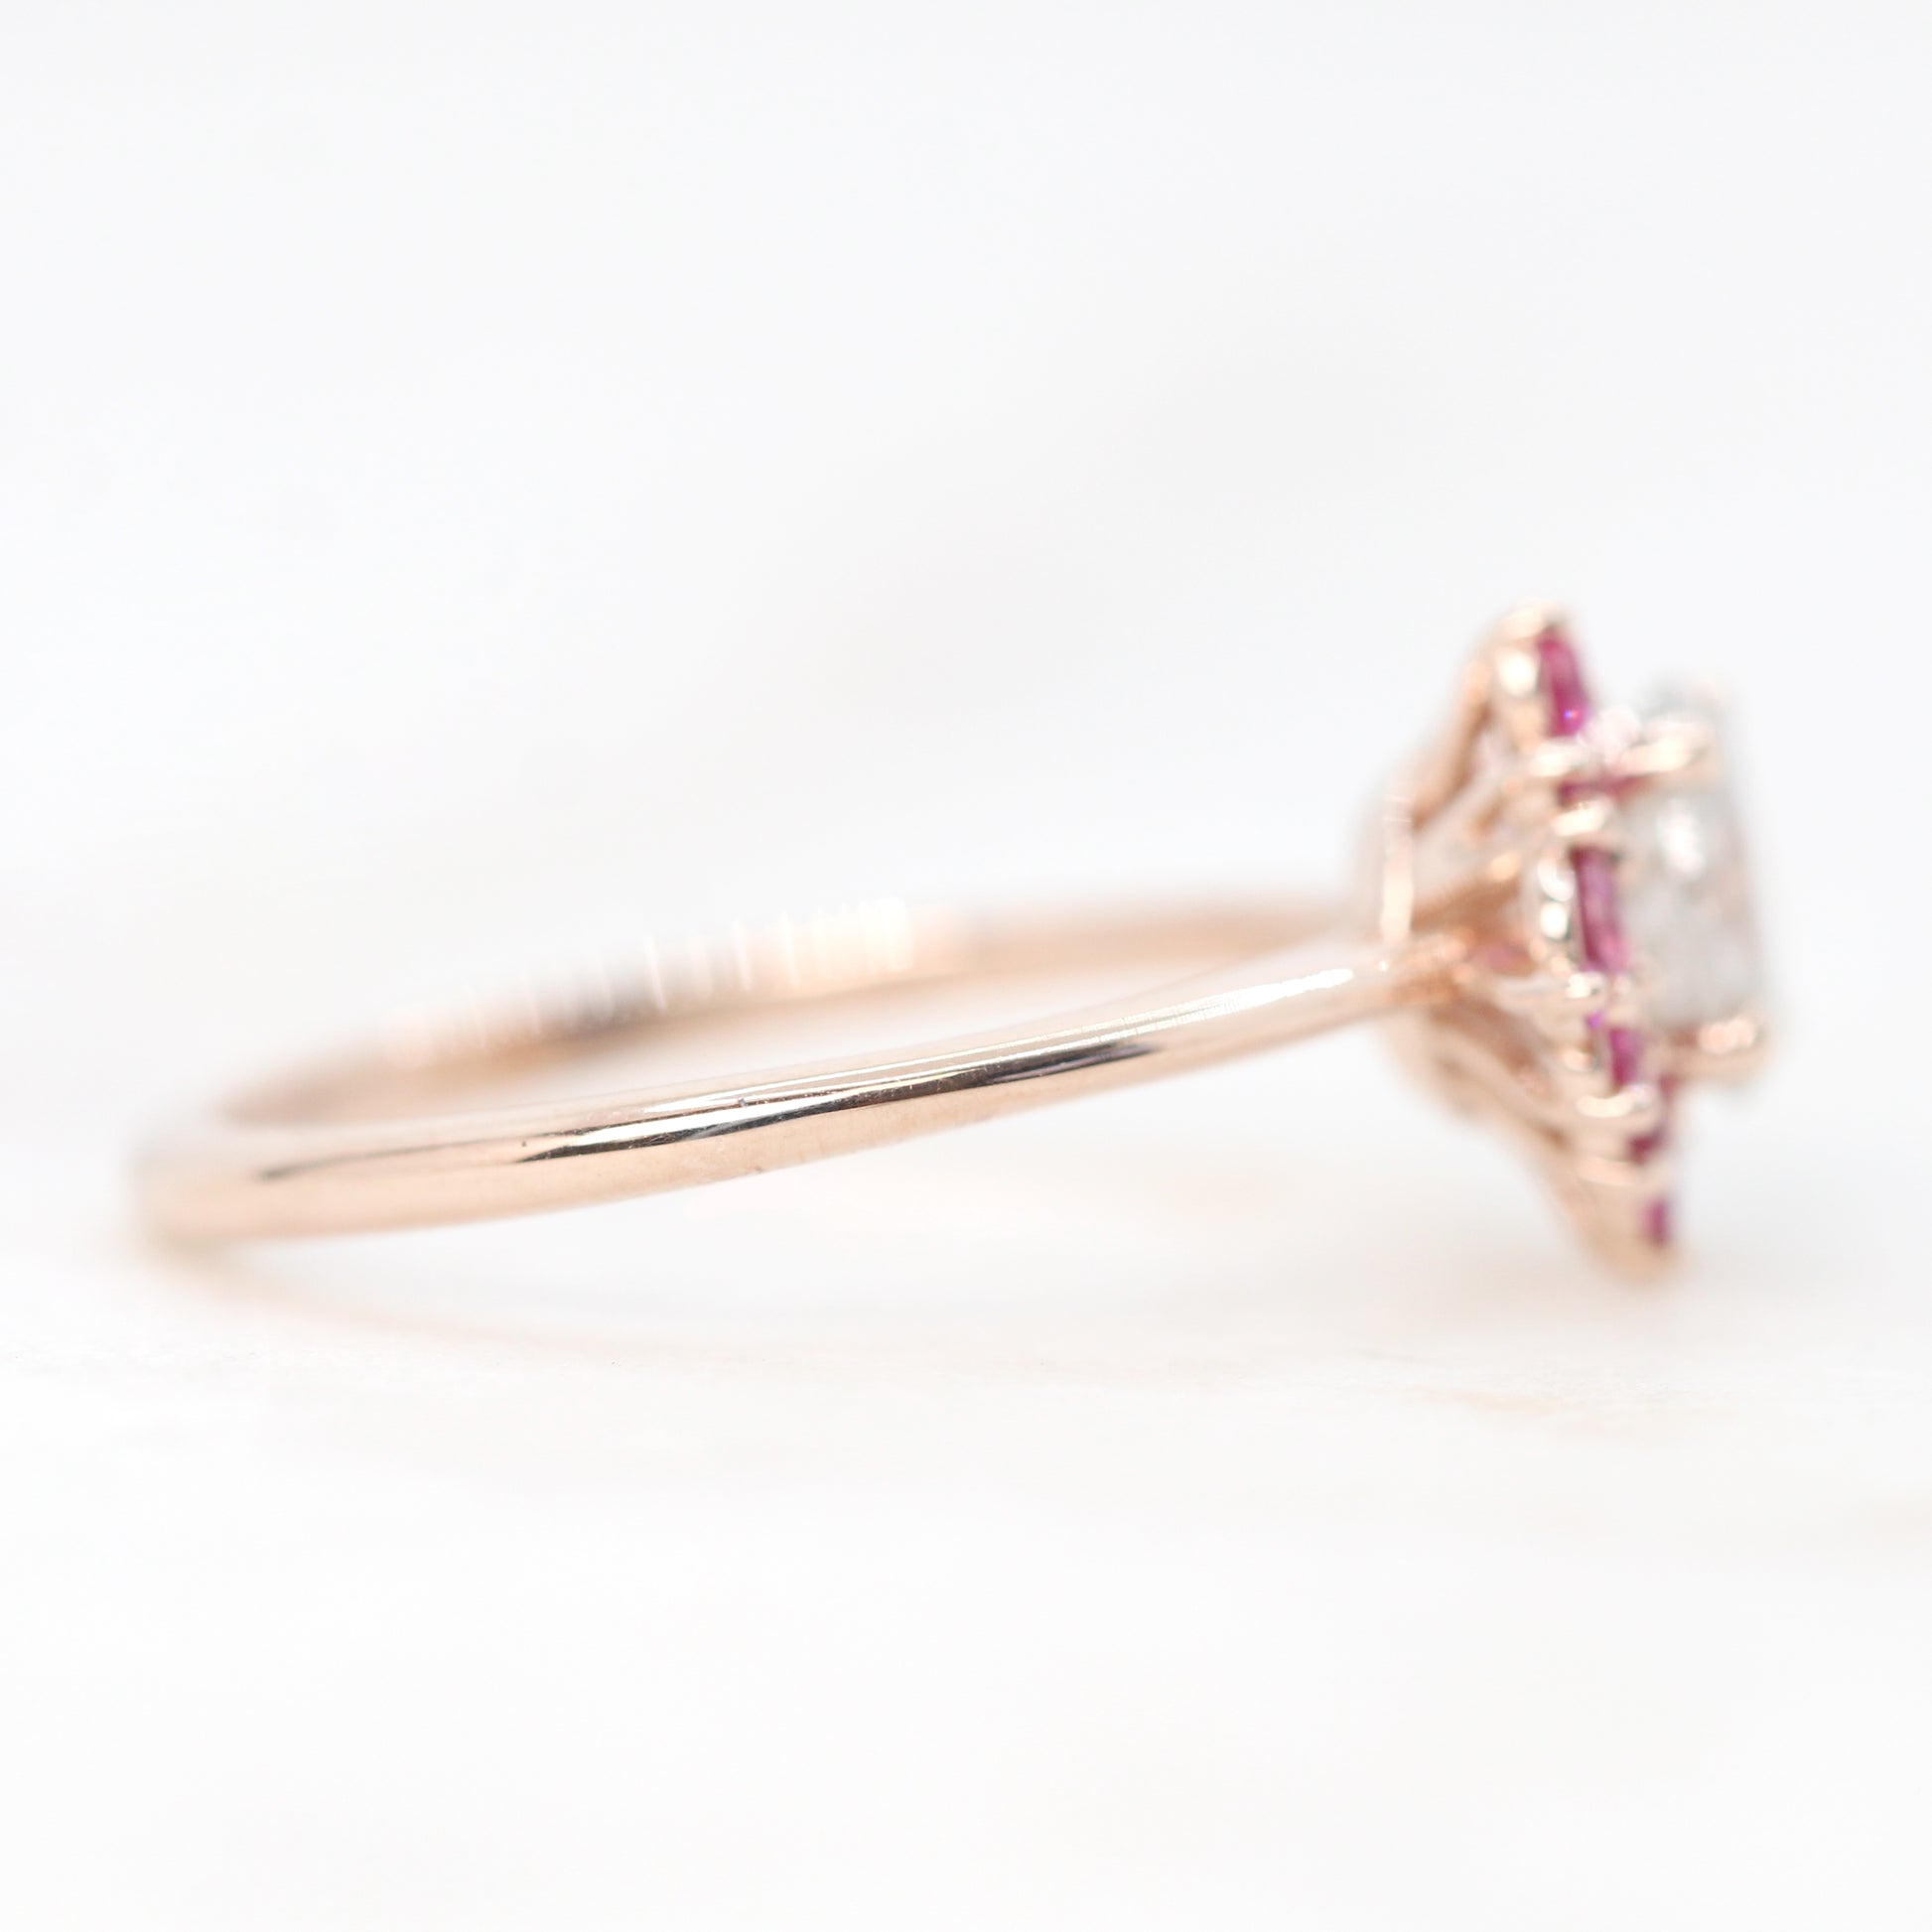 Orion Ring with a 1.02 Carat Round White Celestial Diamond and Pink Sapphire Accents in 14k Rose Gold - Ready to Size and Ship - Midwinter Co. Alternative Bridal Rings and Modern Fine Jewelry